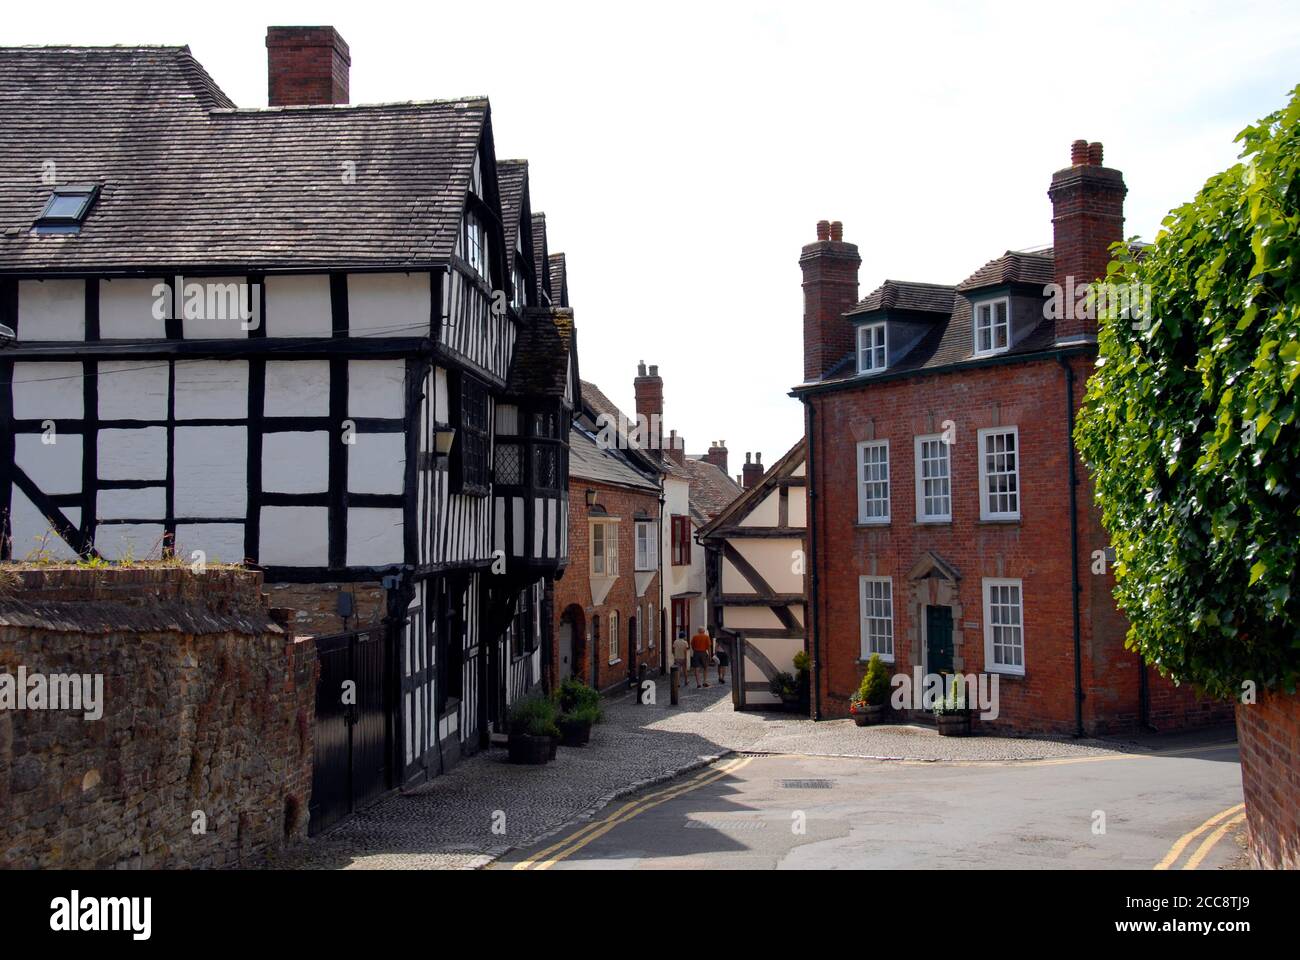 Church Lane, Ledbury, Herefordshire, England, with Church House, the half-timbered building, on the left hand side Stock Photo